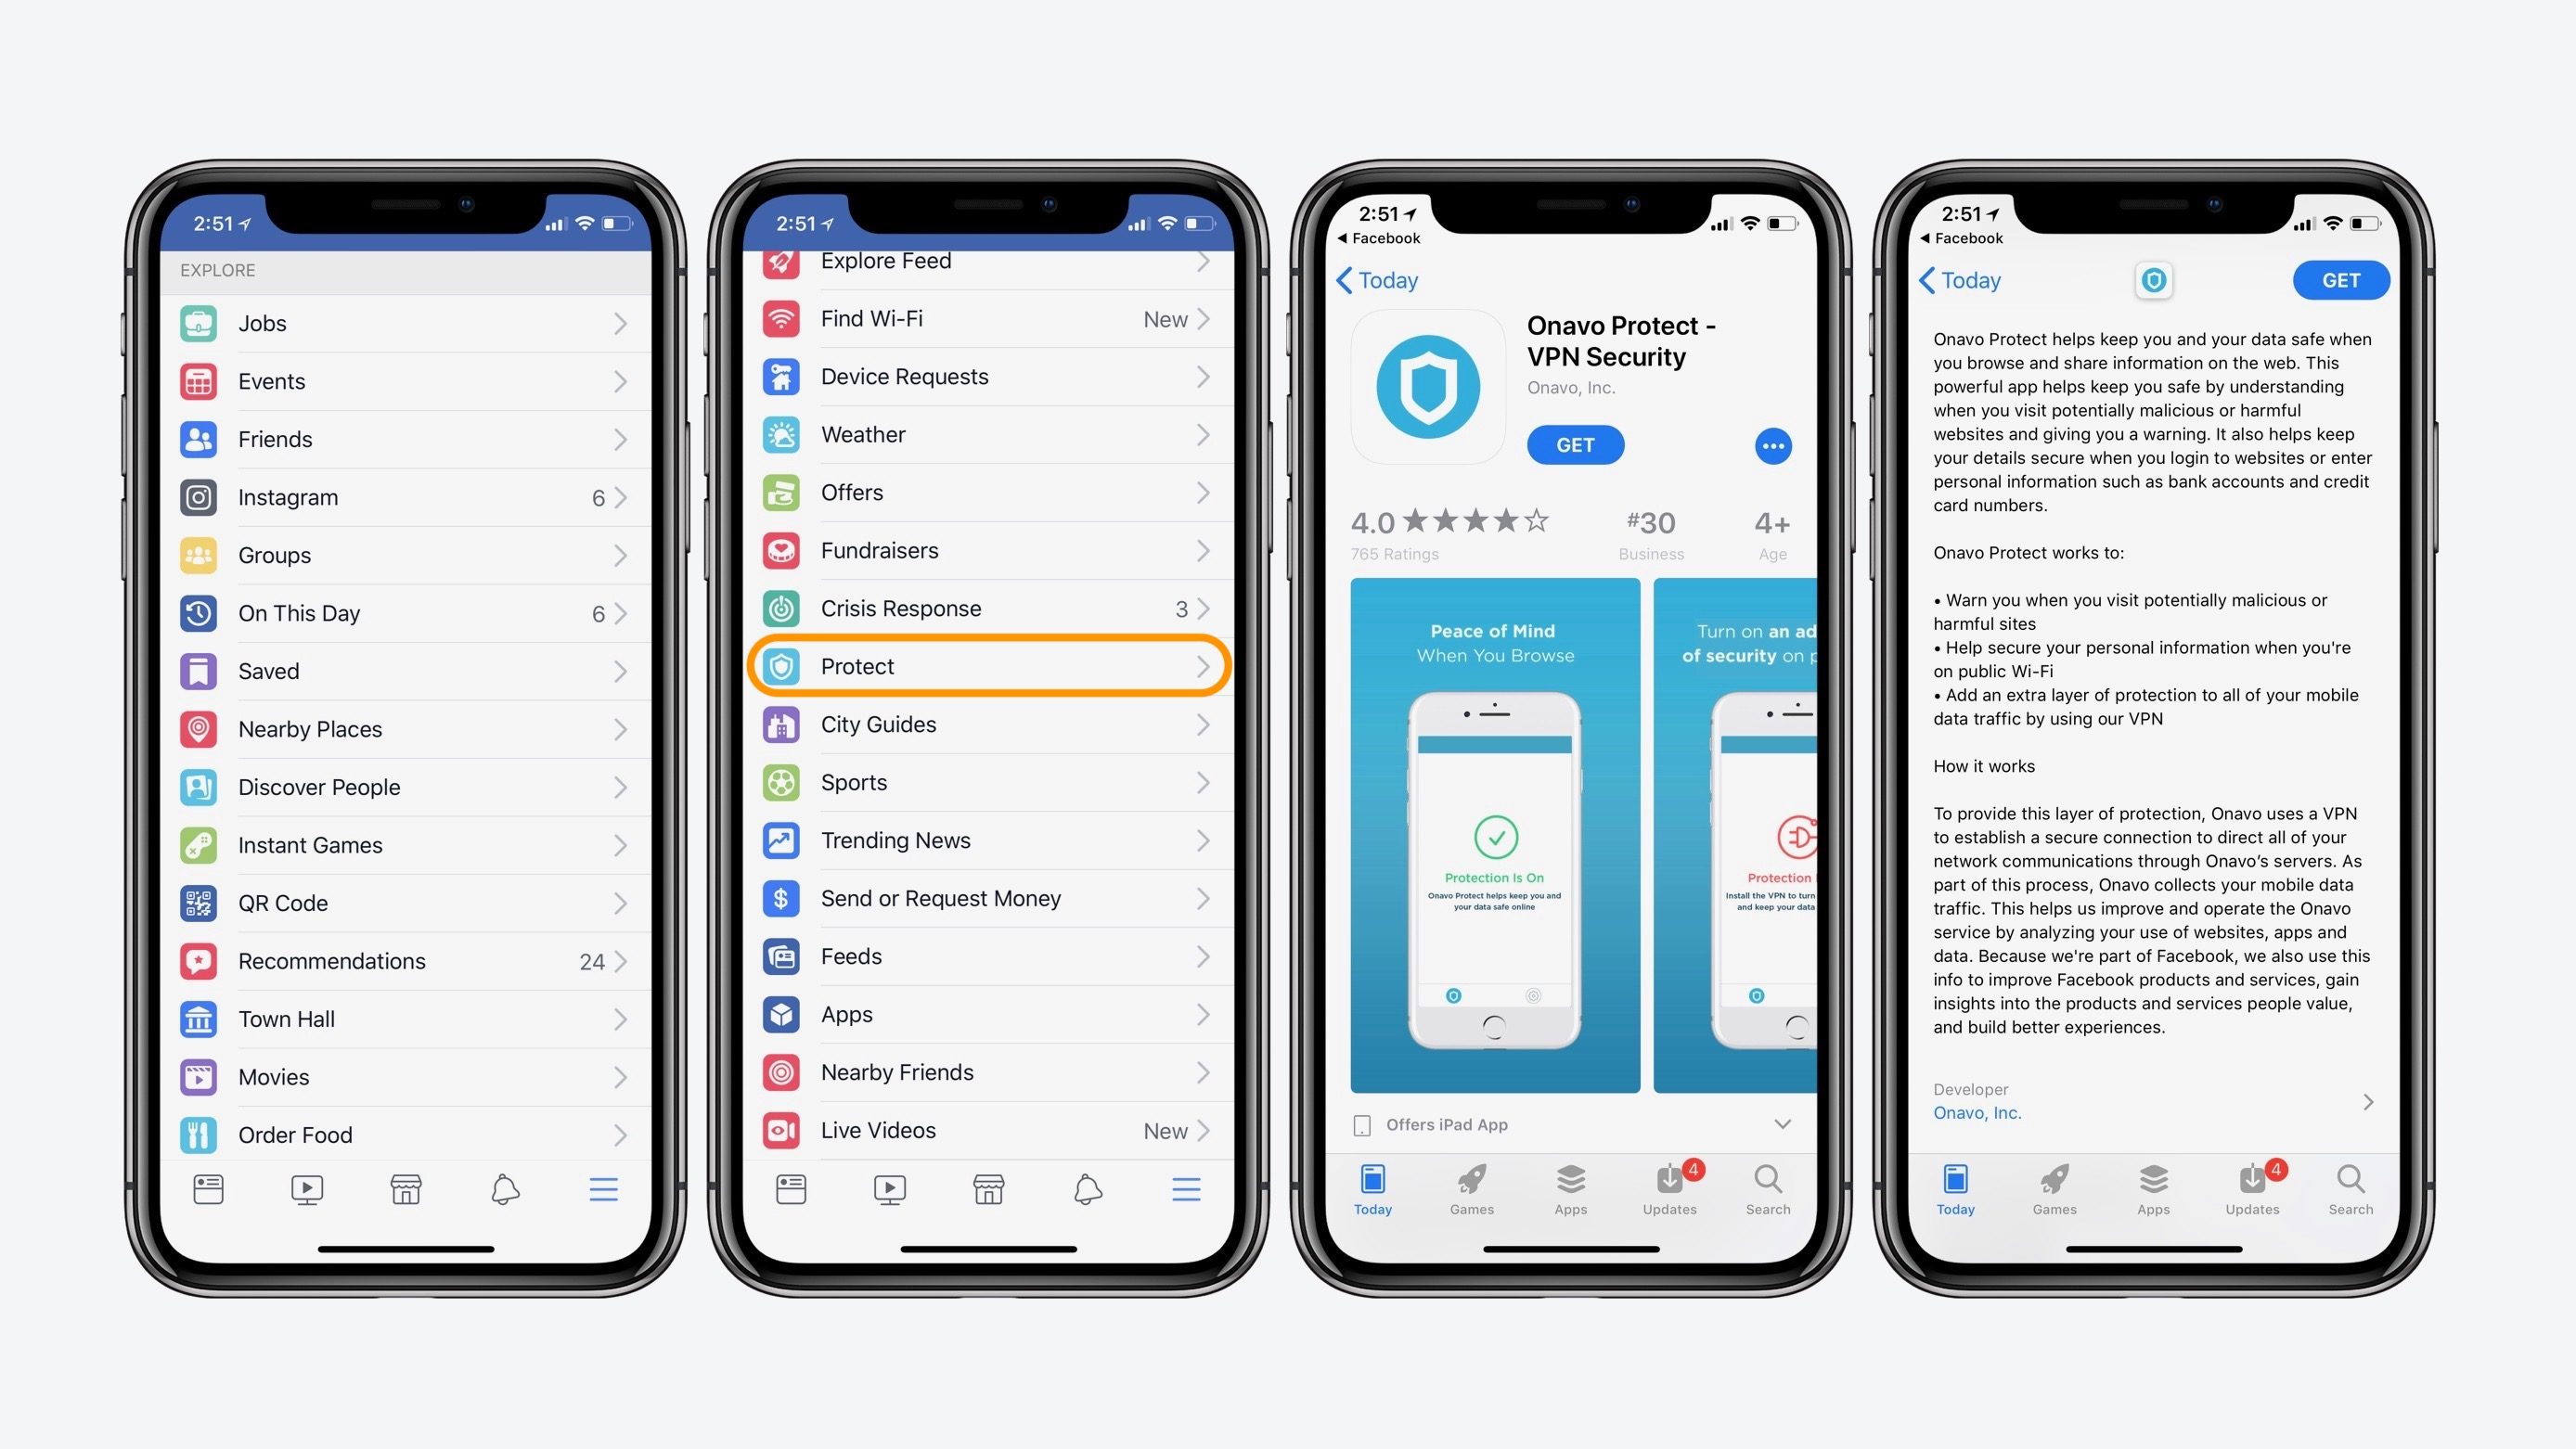 At Apple’s Request, Facebook is Removing its Spyware-like Onavo VPN App from App Store